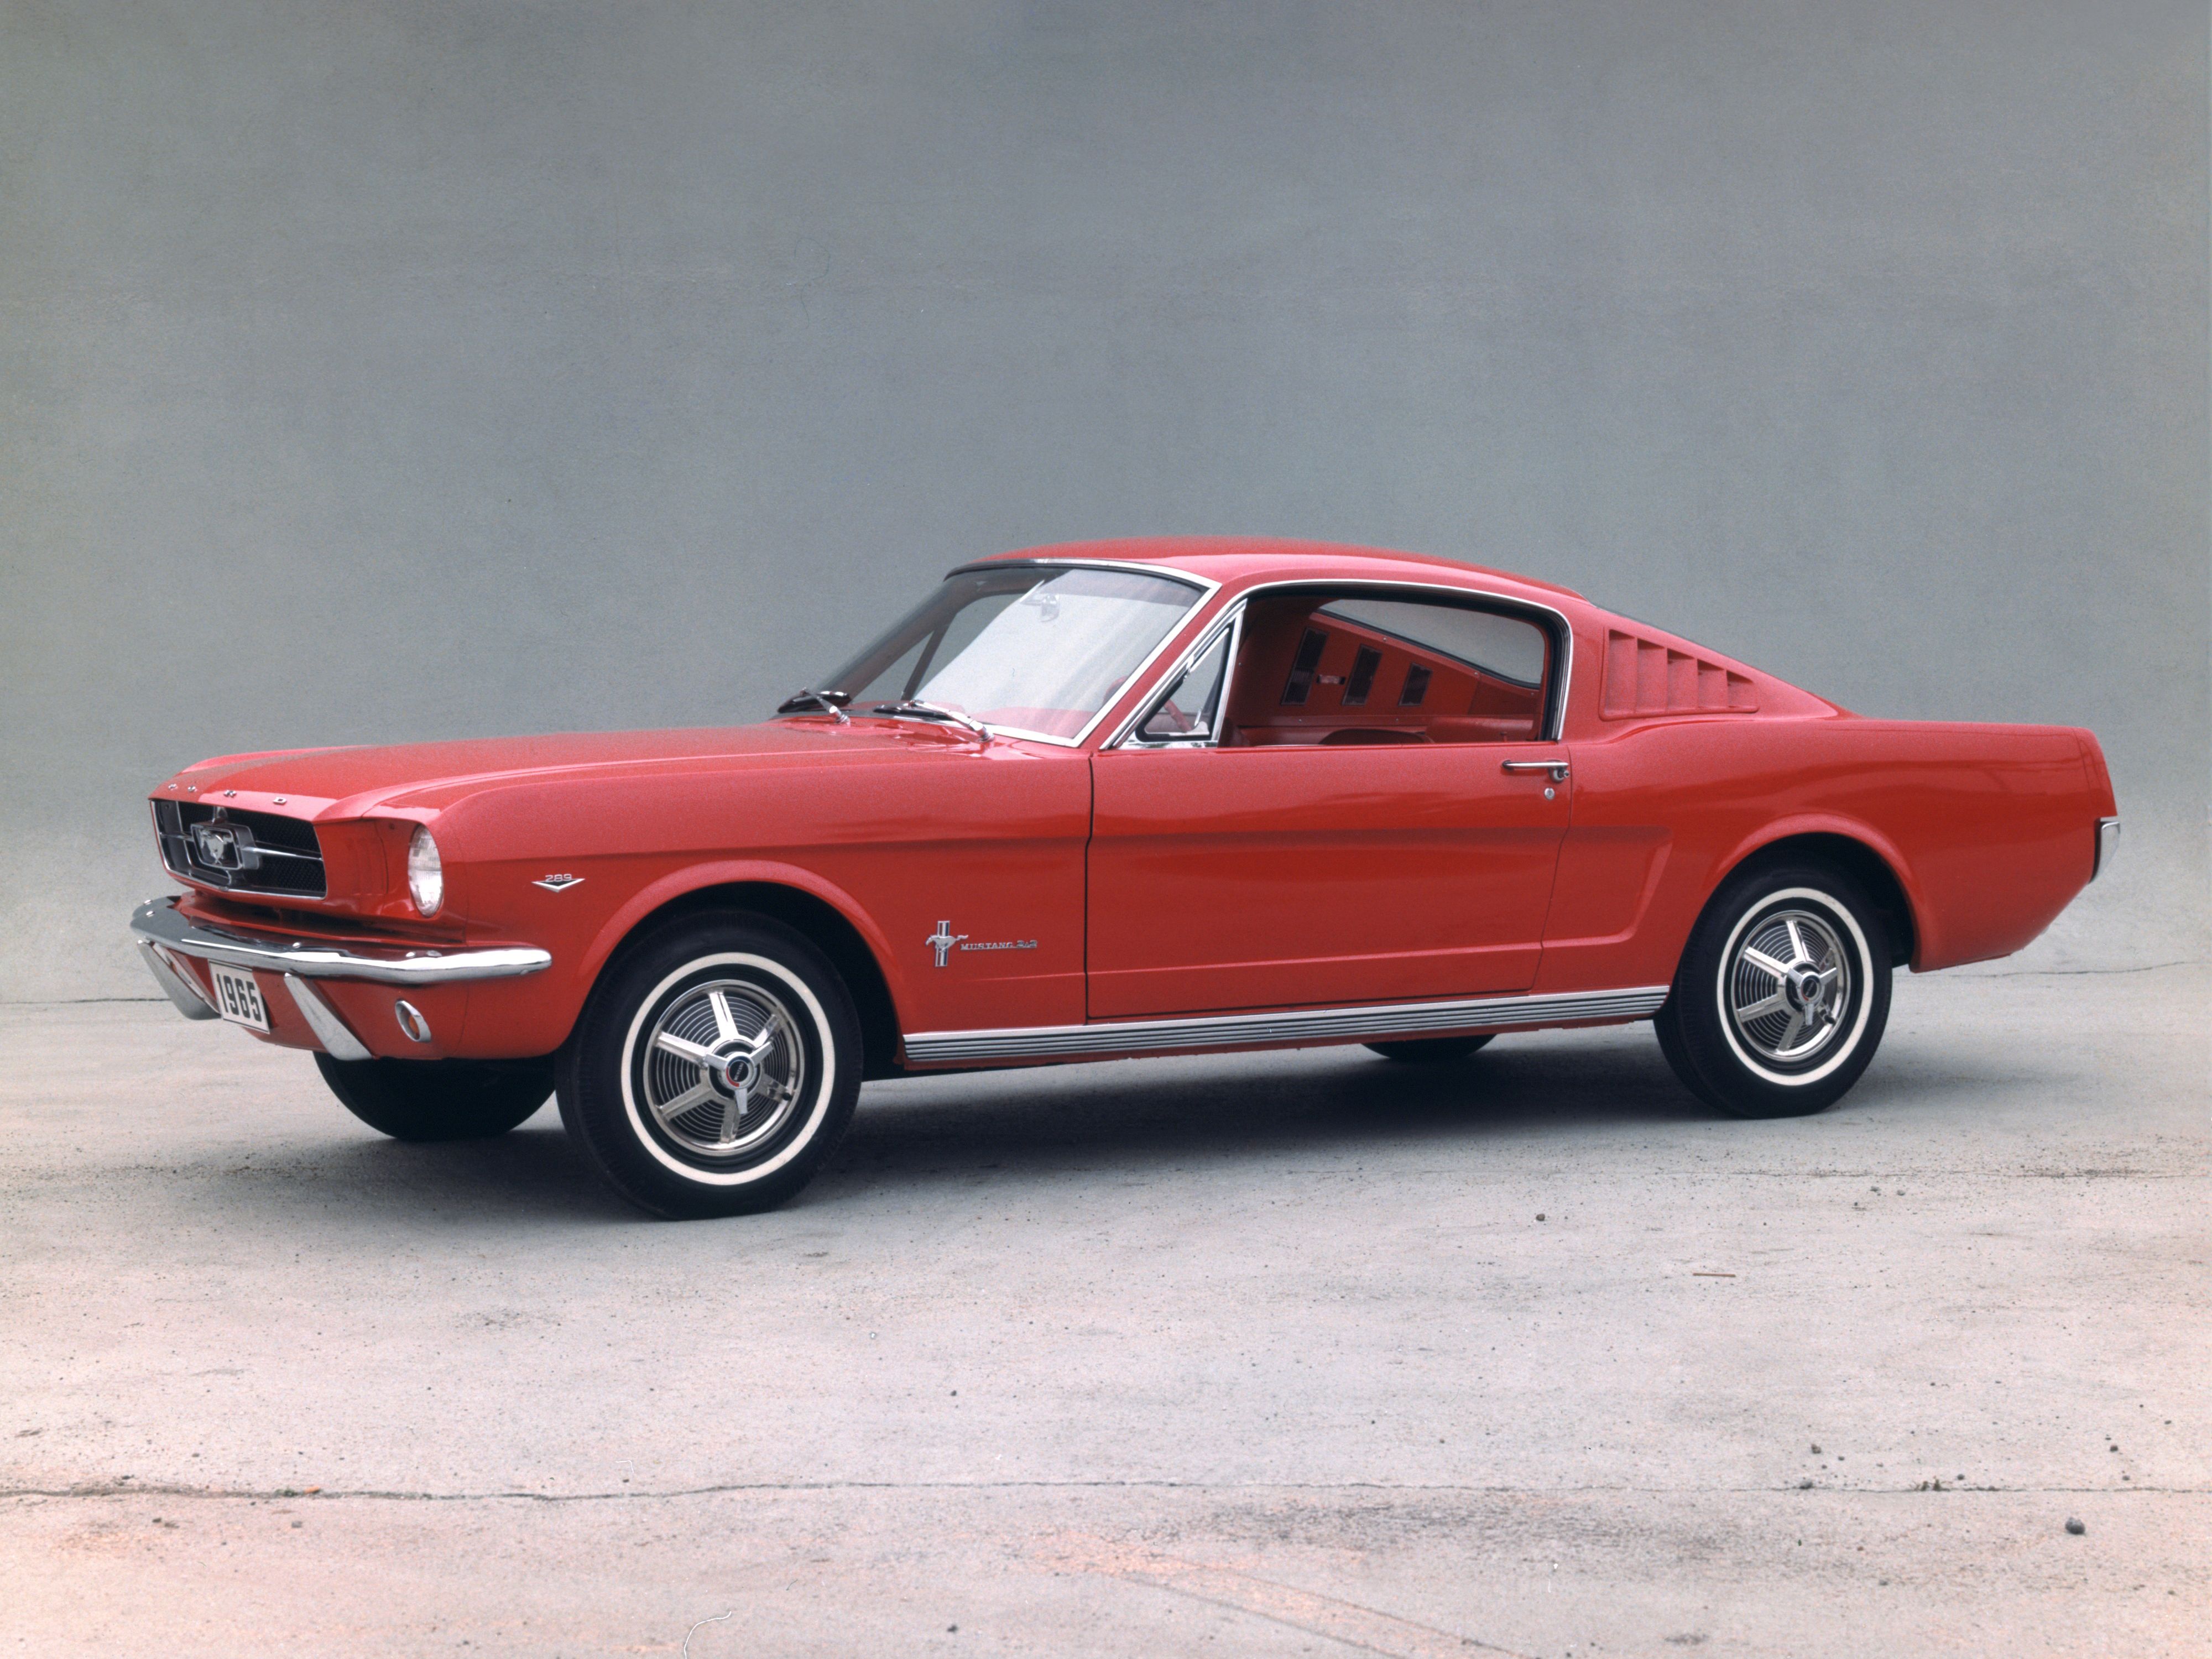 A classic Ford Mustang.